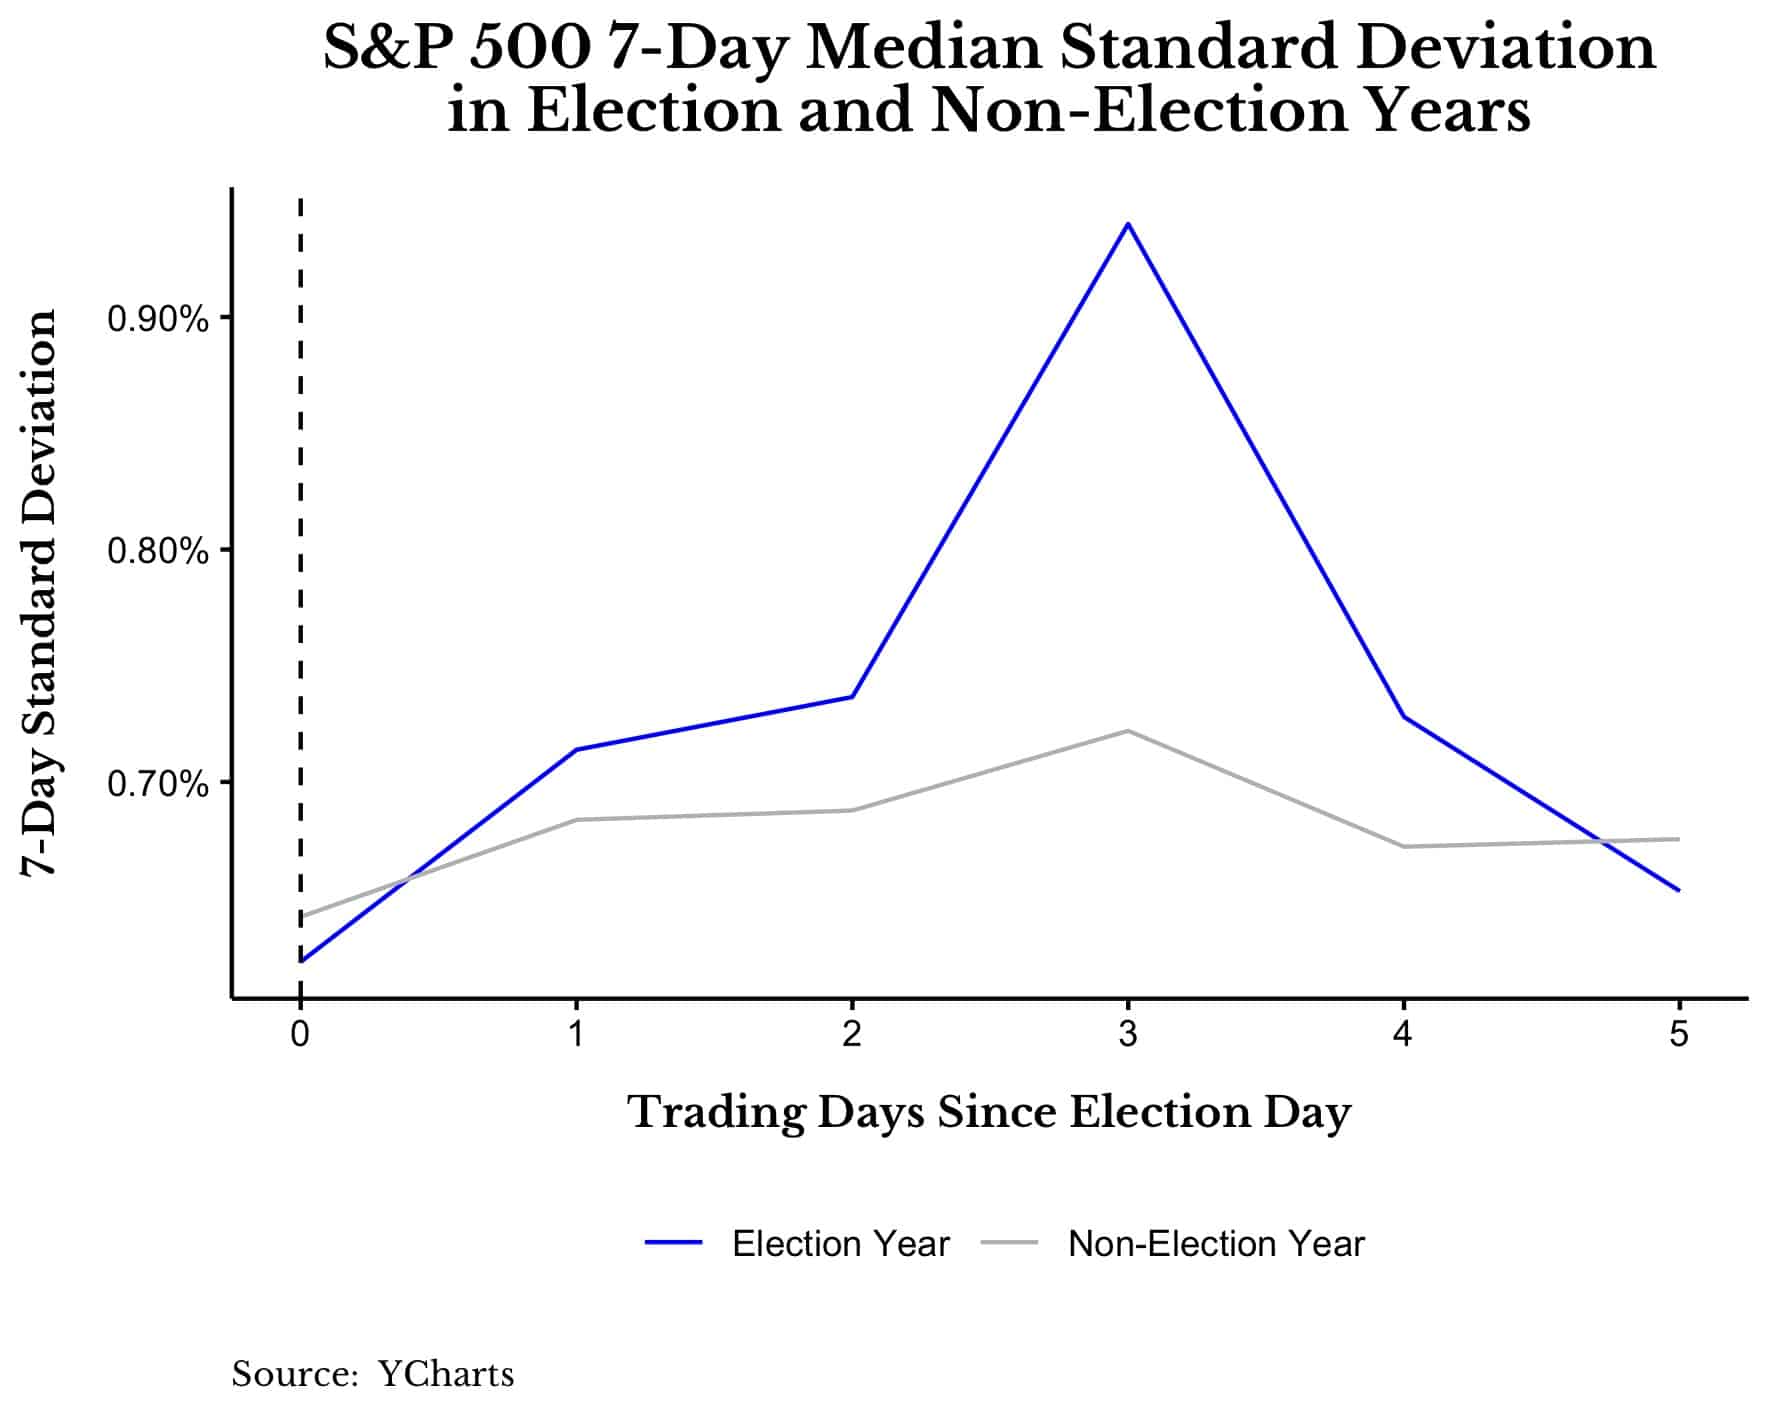 S&P 500 7-day median standard deviation in election and non-election years right after election day